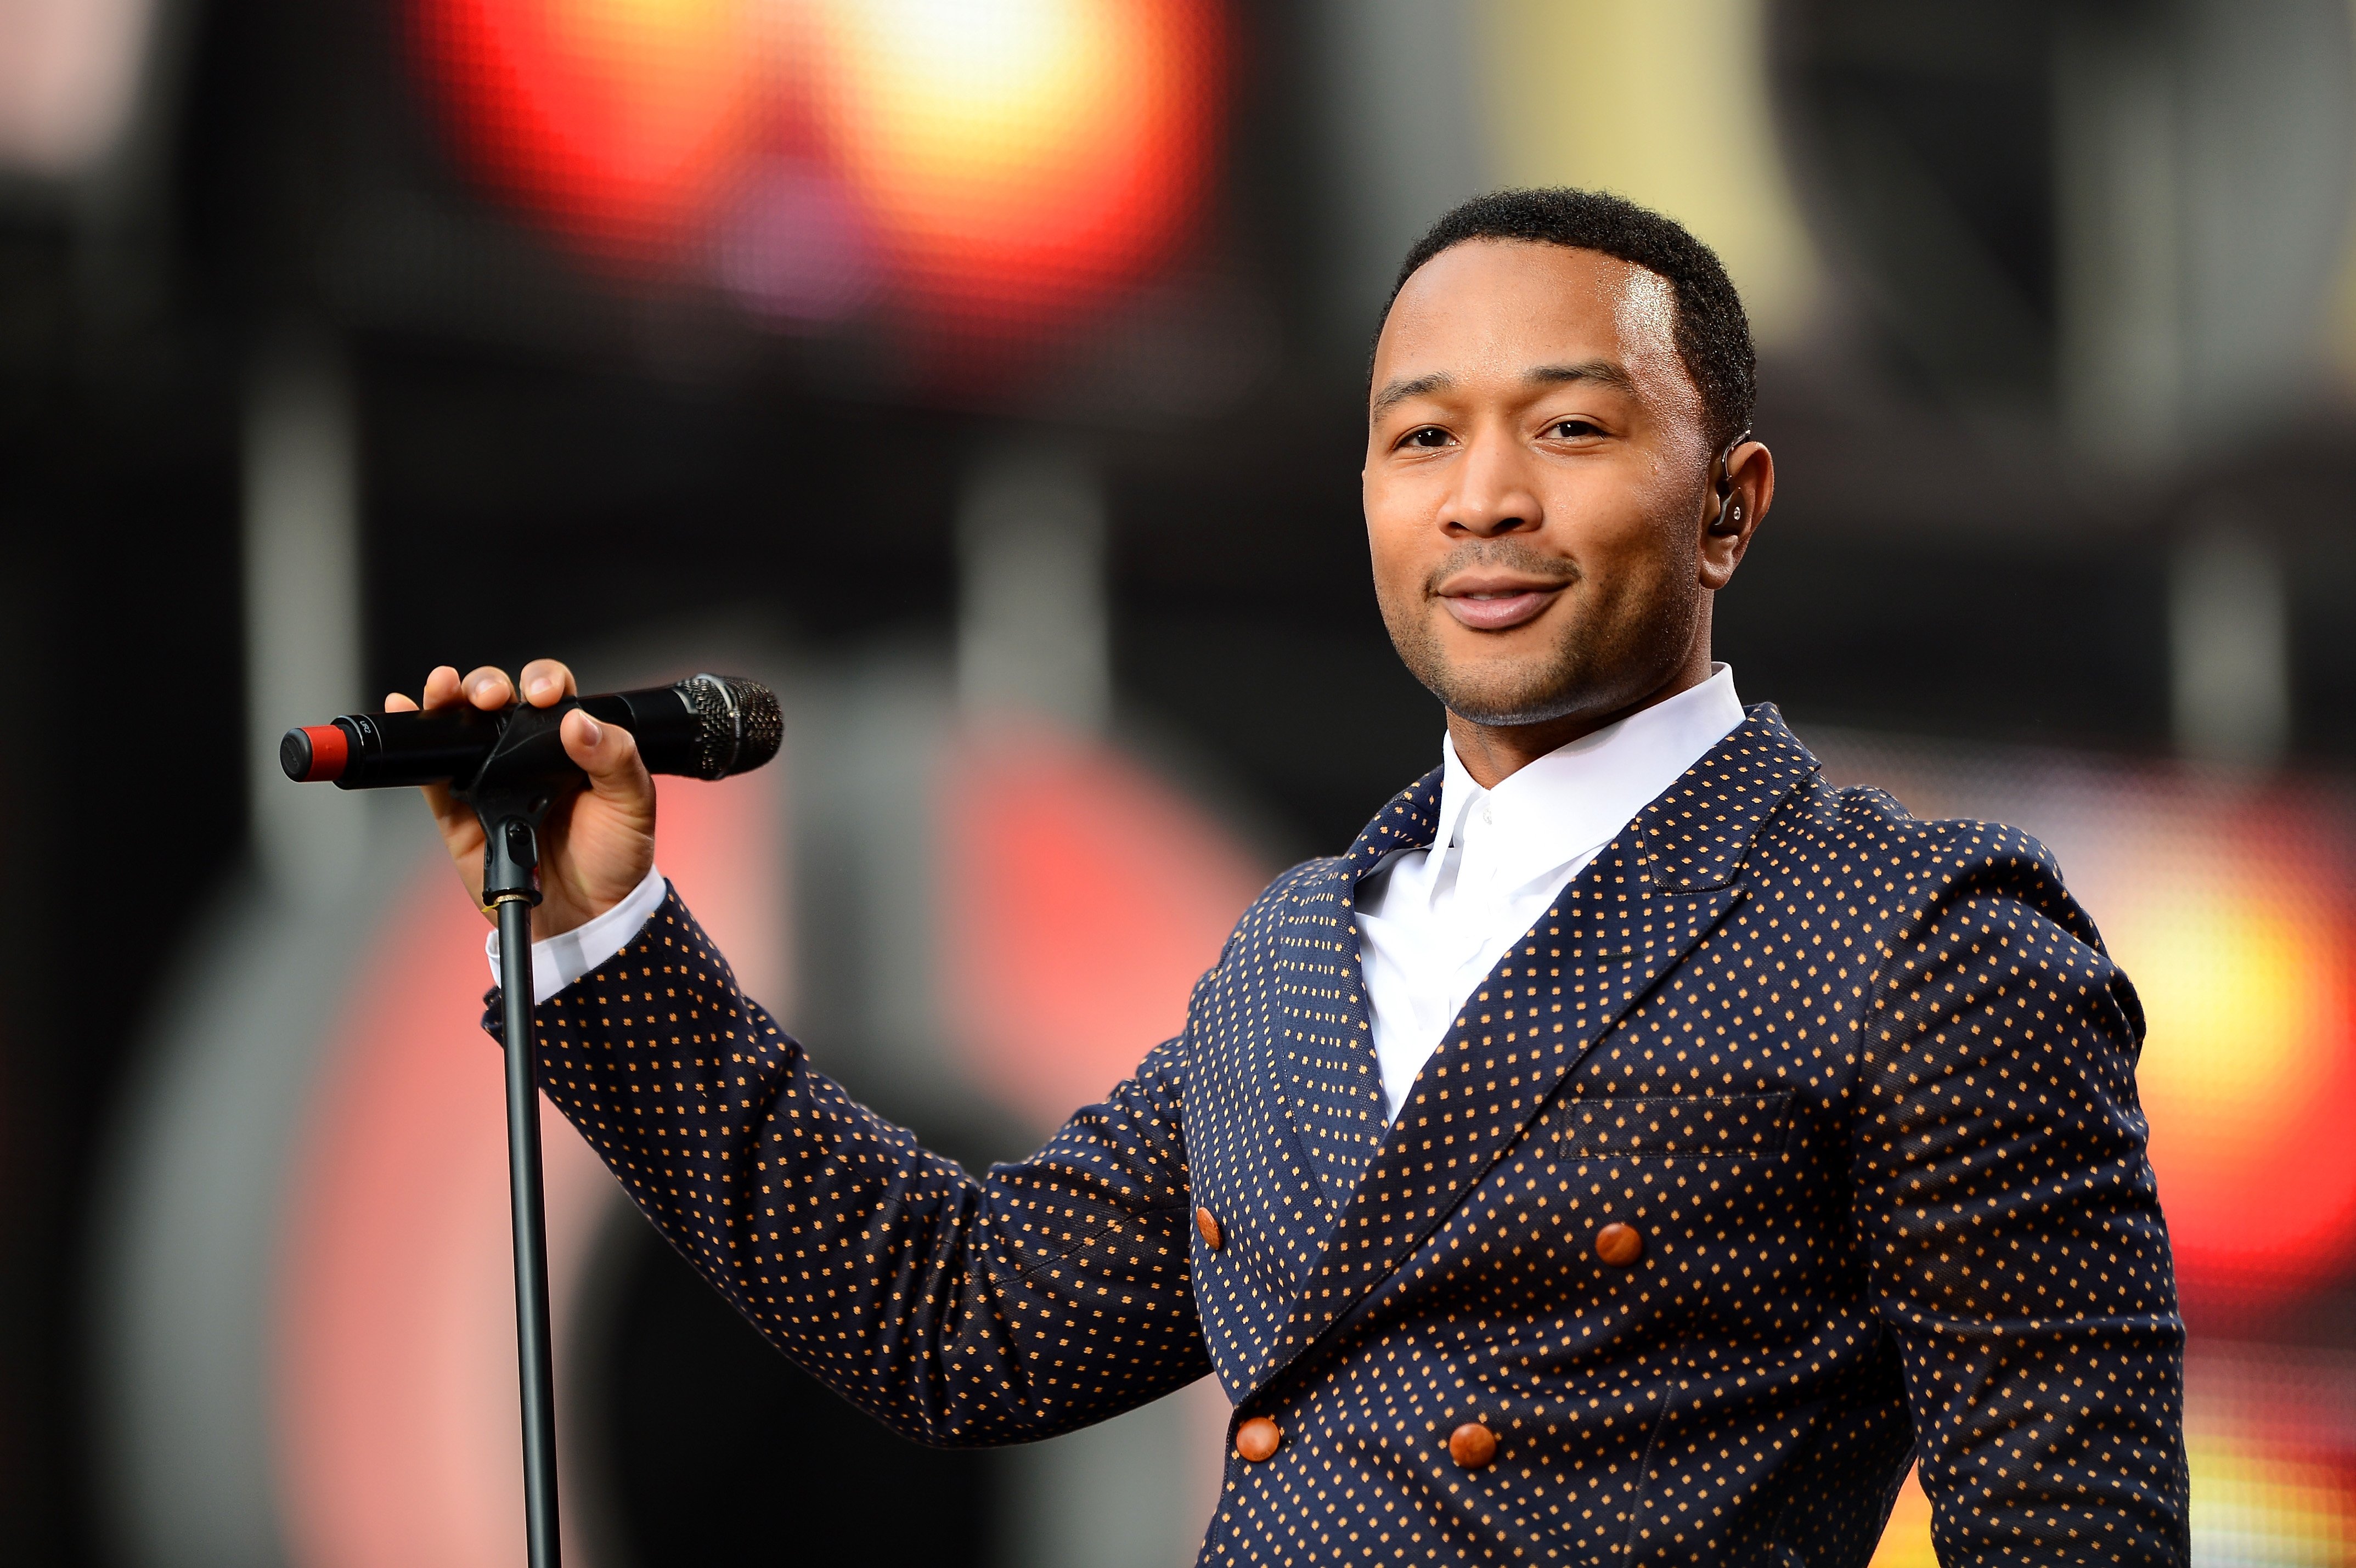 John Legend performs on stage at the "Chime For Change: The Sound Of Change Live" Concert at Twickenham Stadium on June 1, 2013, in London, England. | Source: Getty Images.